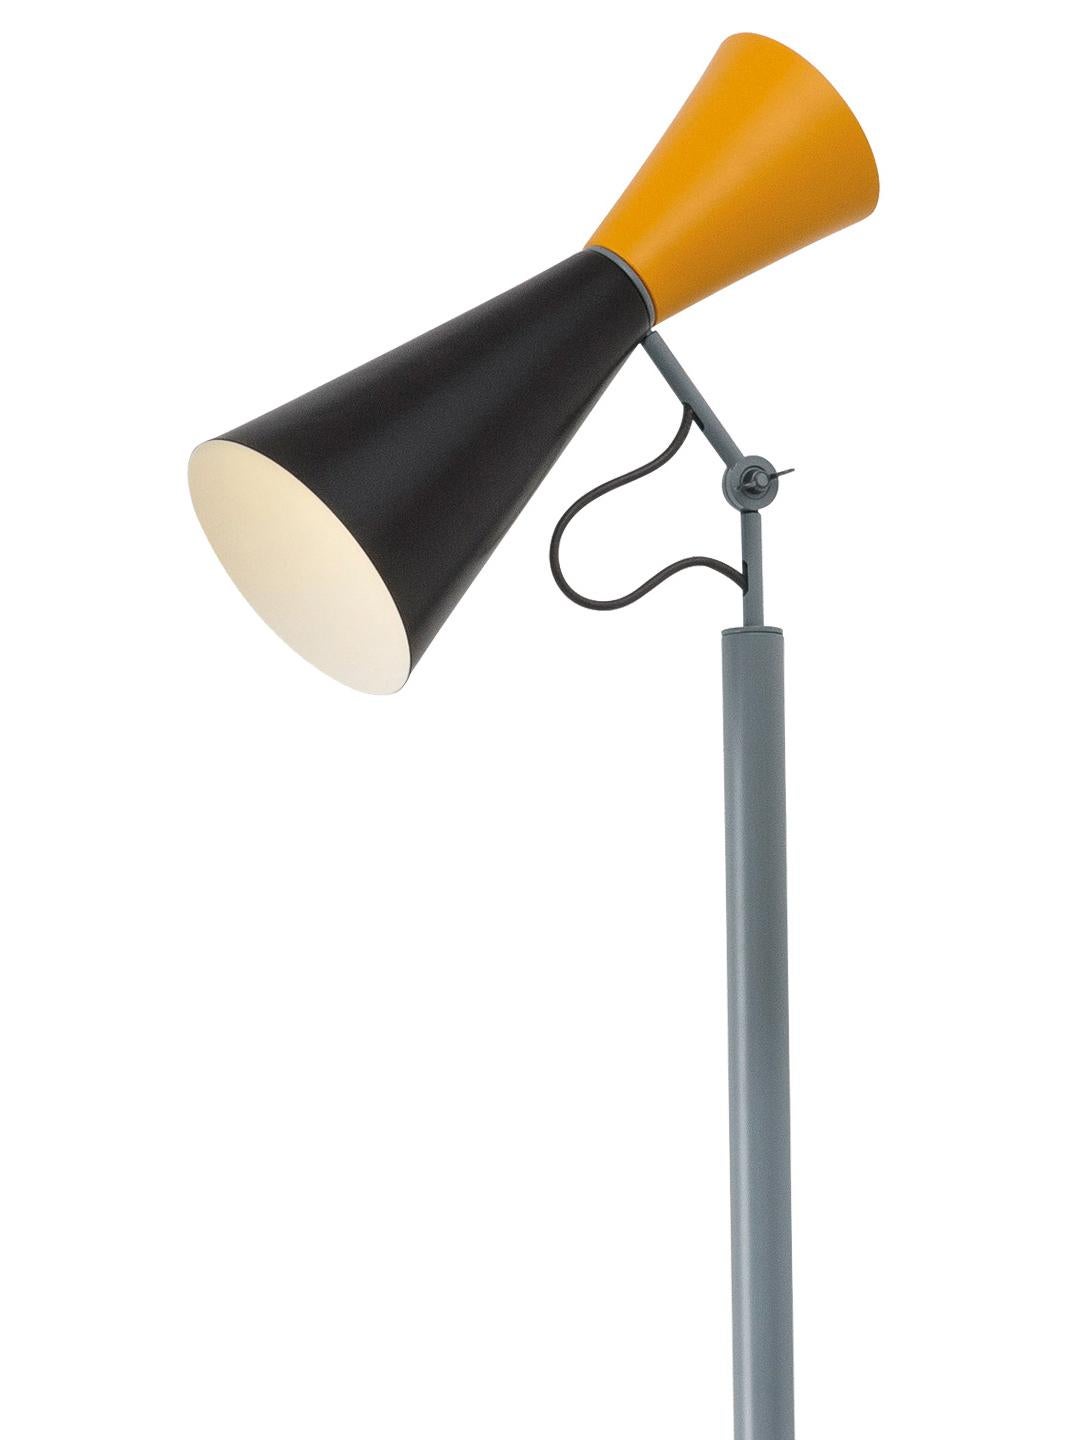 Painted Le Corbusier 'Parliament' Floor Lamp for Nemo in Black & Red For Sale